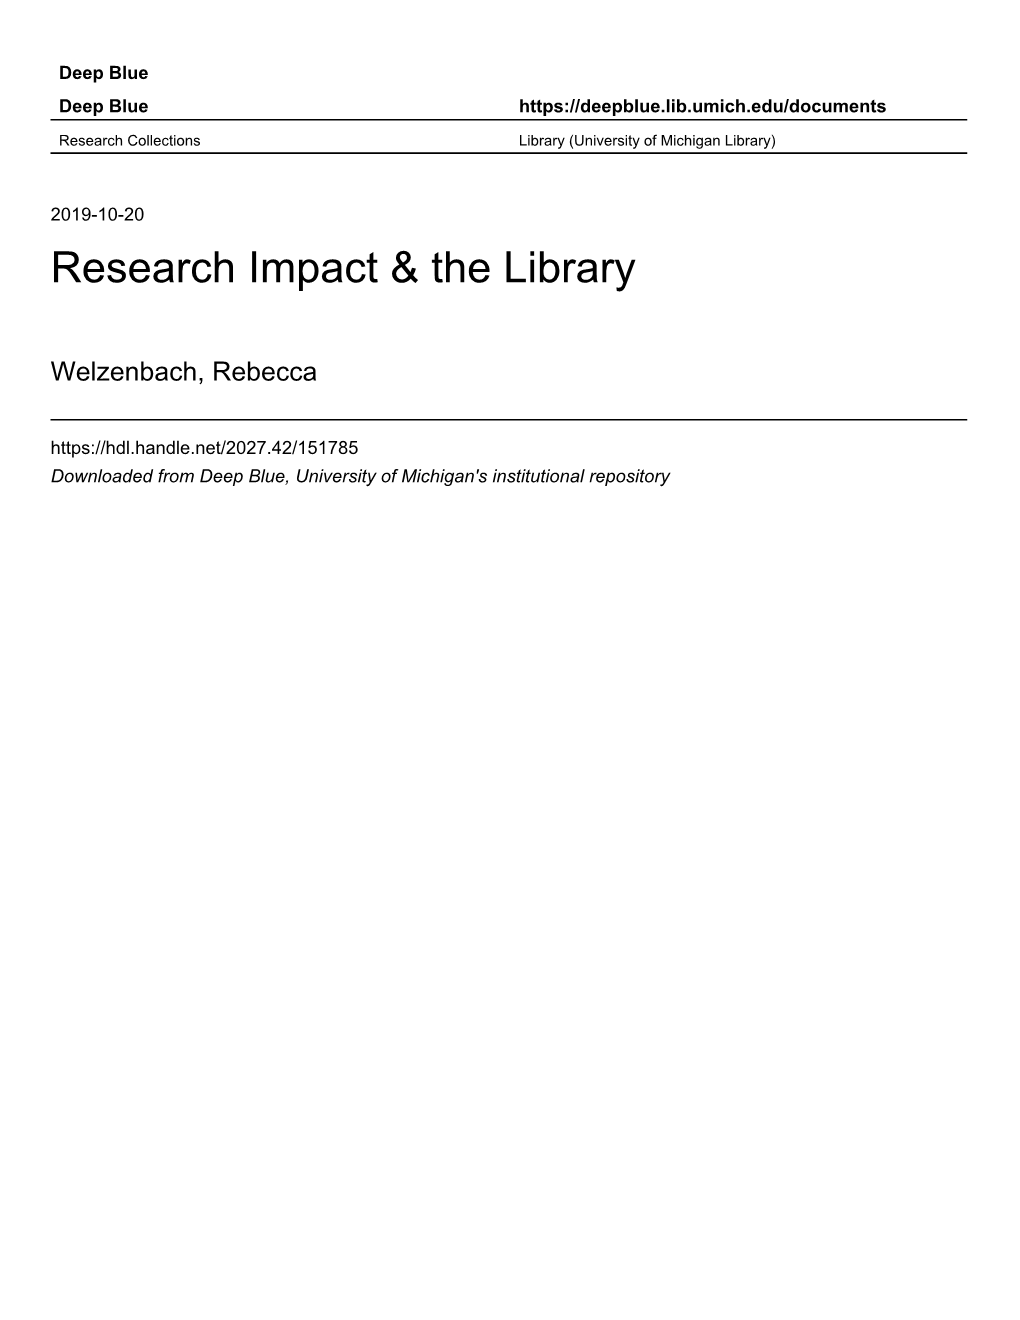 Research Impact & the Library